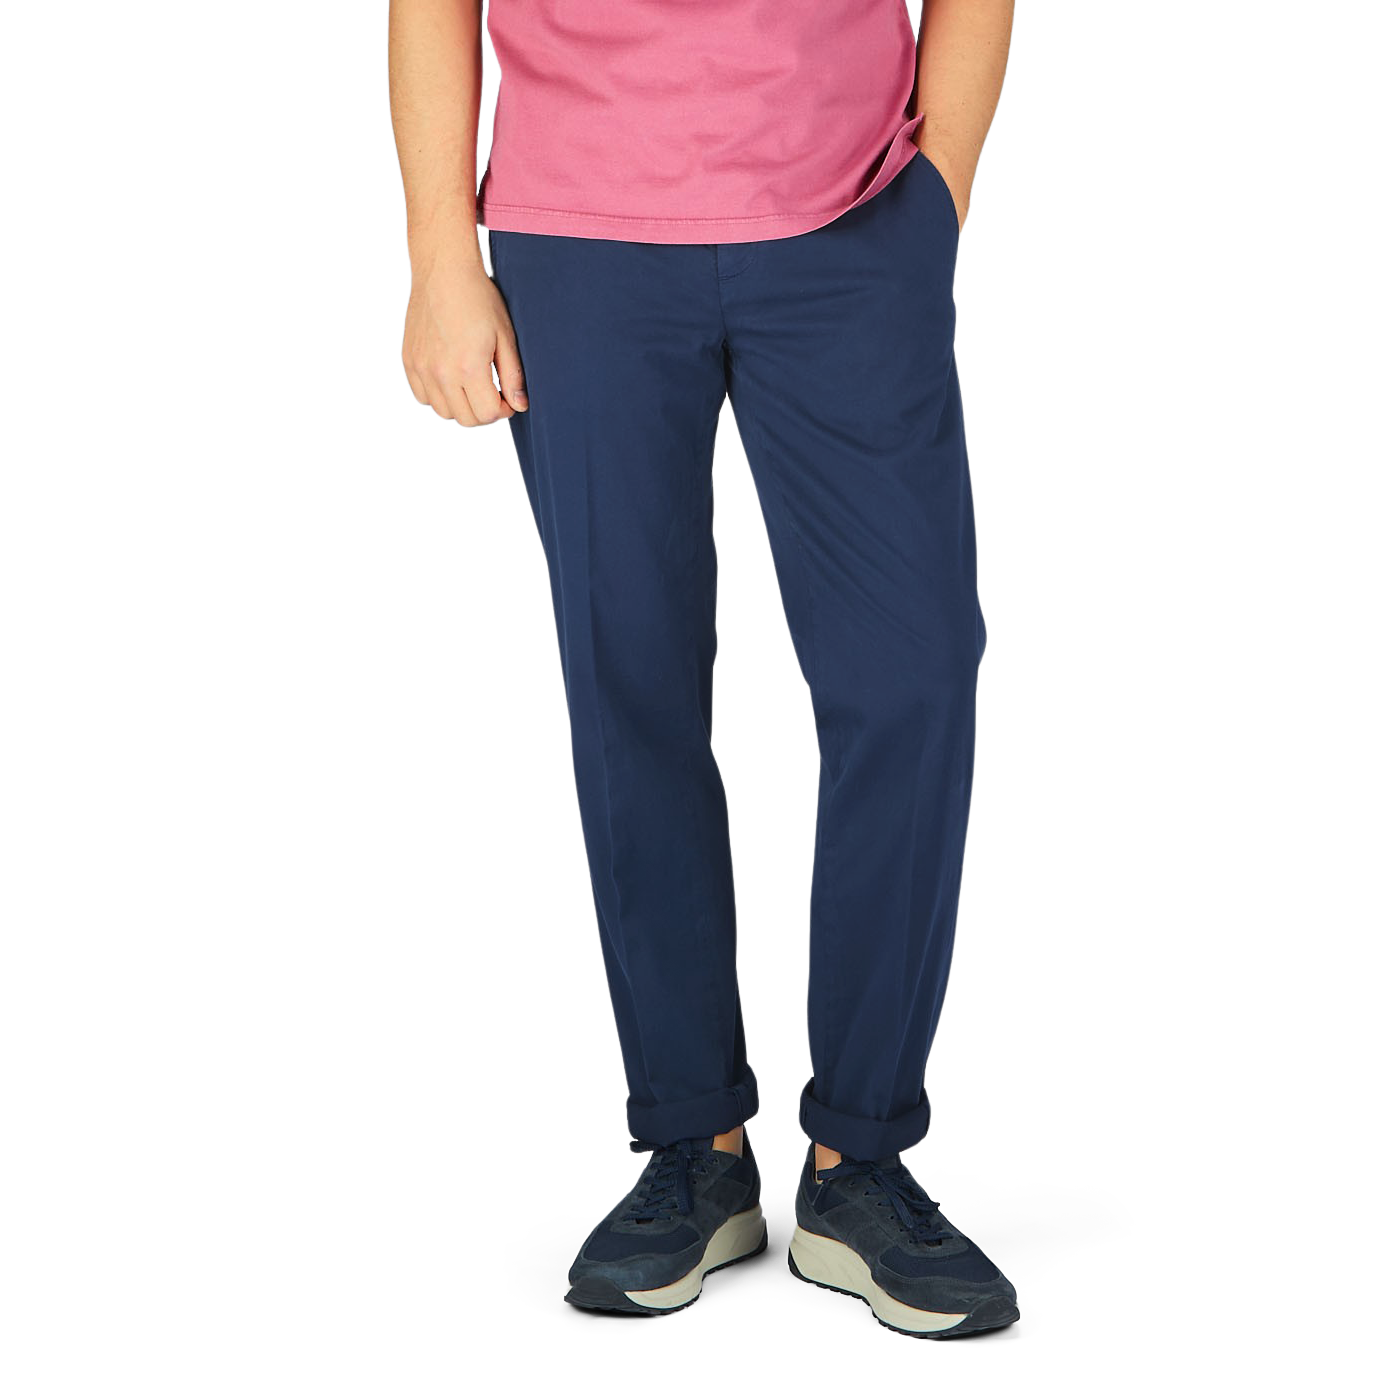 A man wearing navy blue Canali Navy Blue Cotton Stretch Flat Front Chinos and a pink shirt.